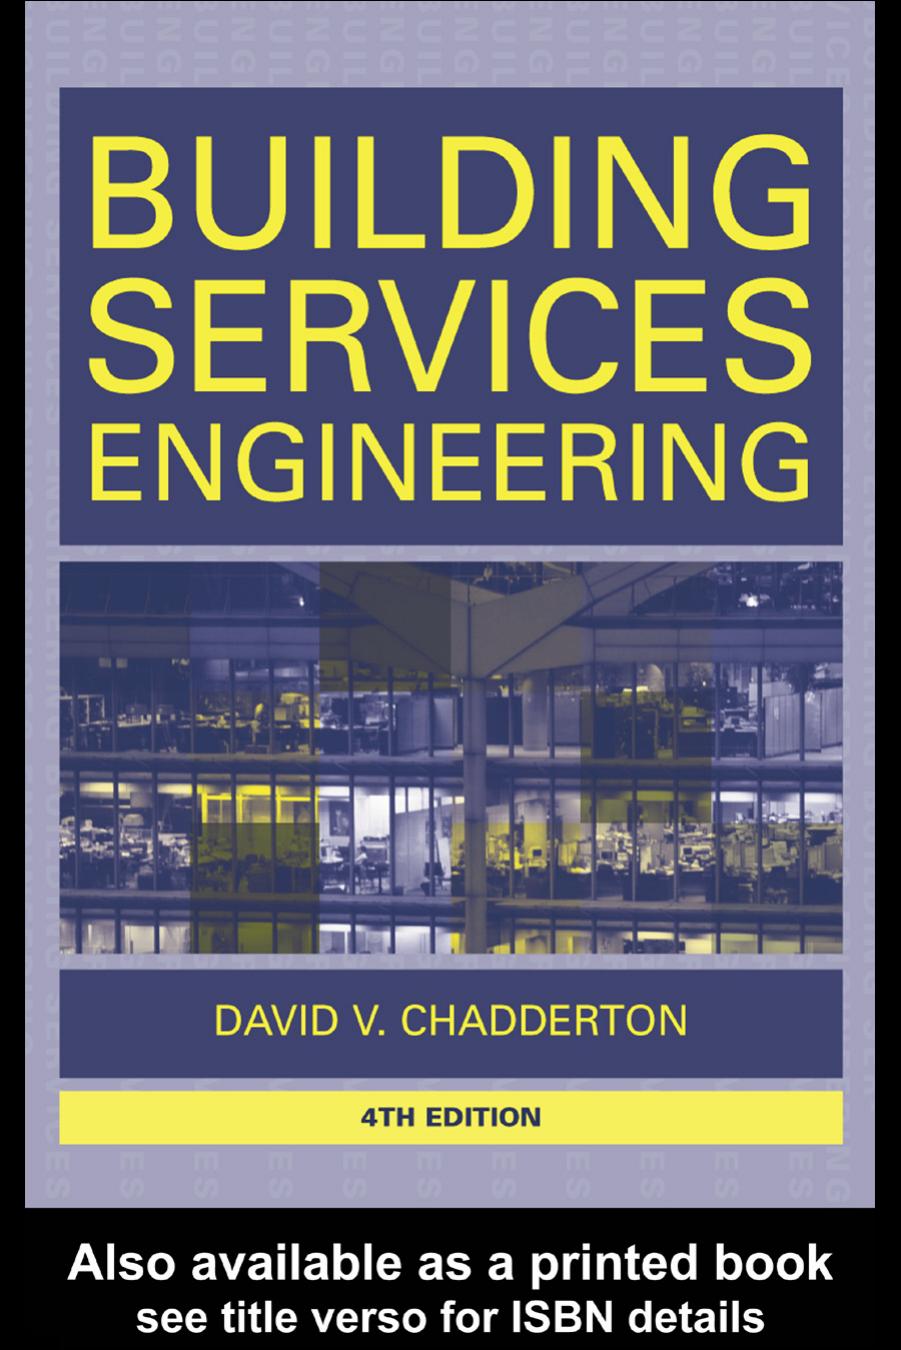 Building Services Engineering, Fourth edition